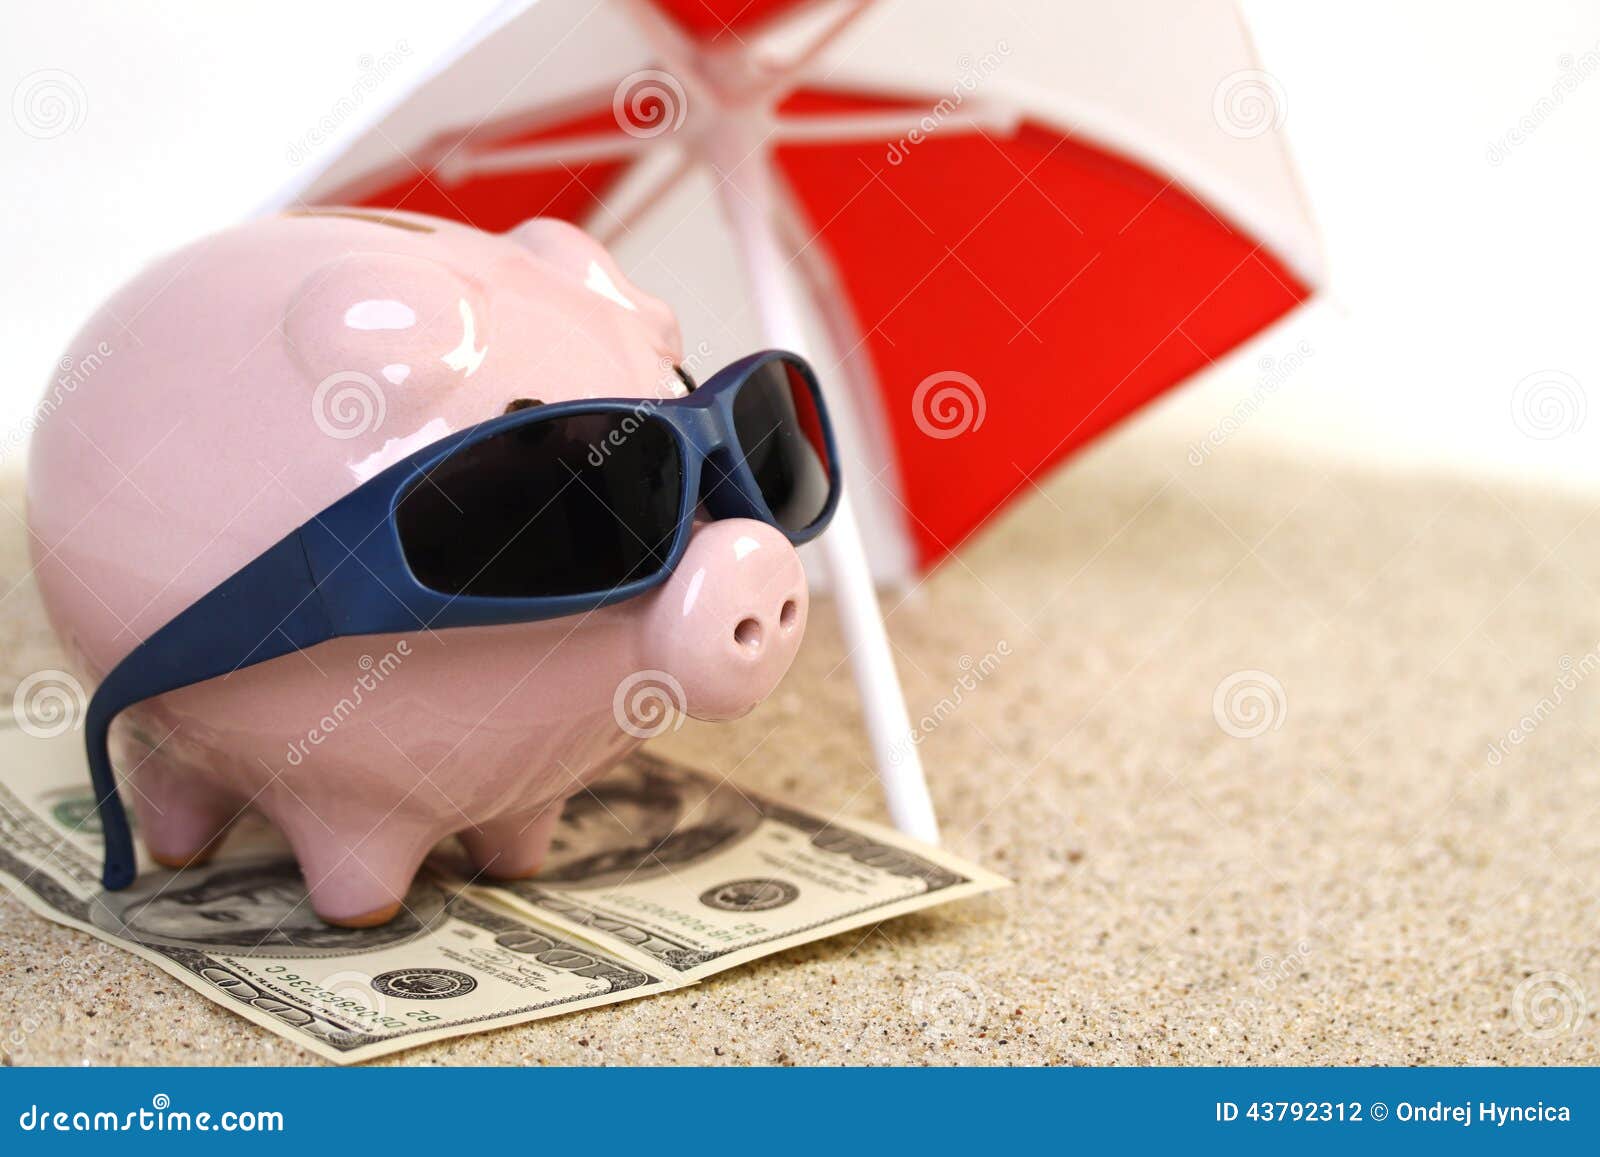 summer piggy bank standing on towel from greenback hundred dollars with sunglasses on the beach sand unter red and white sunshade